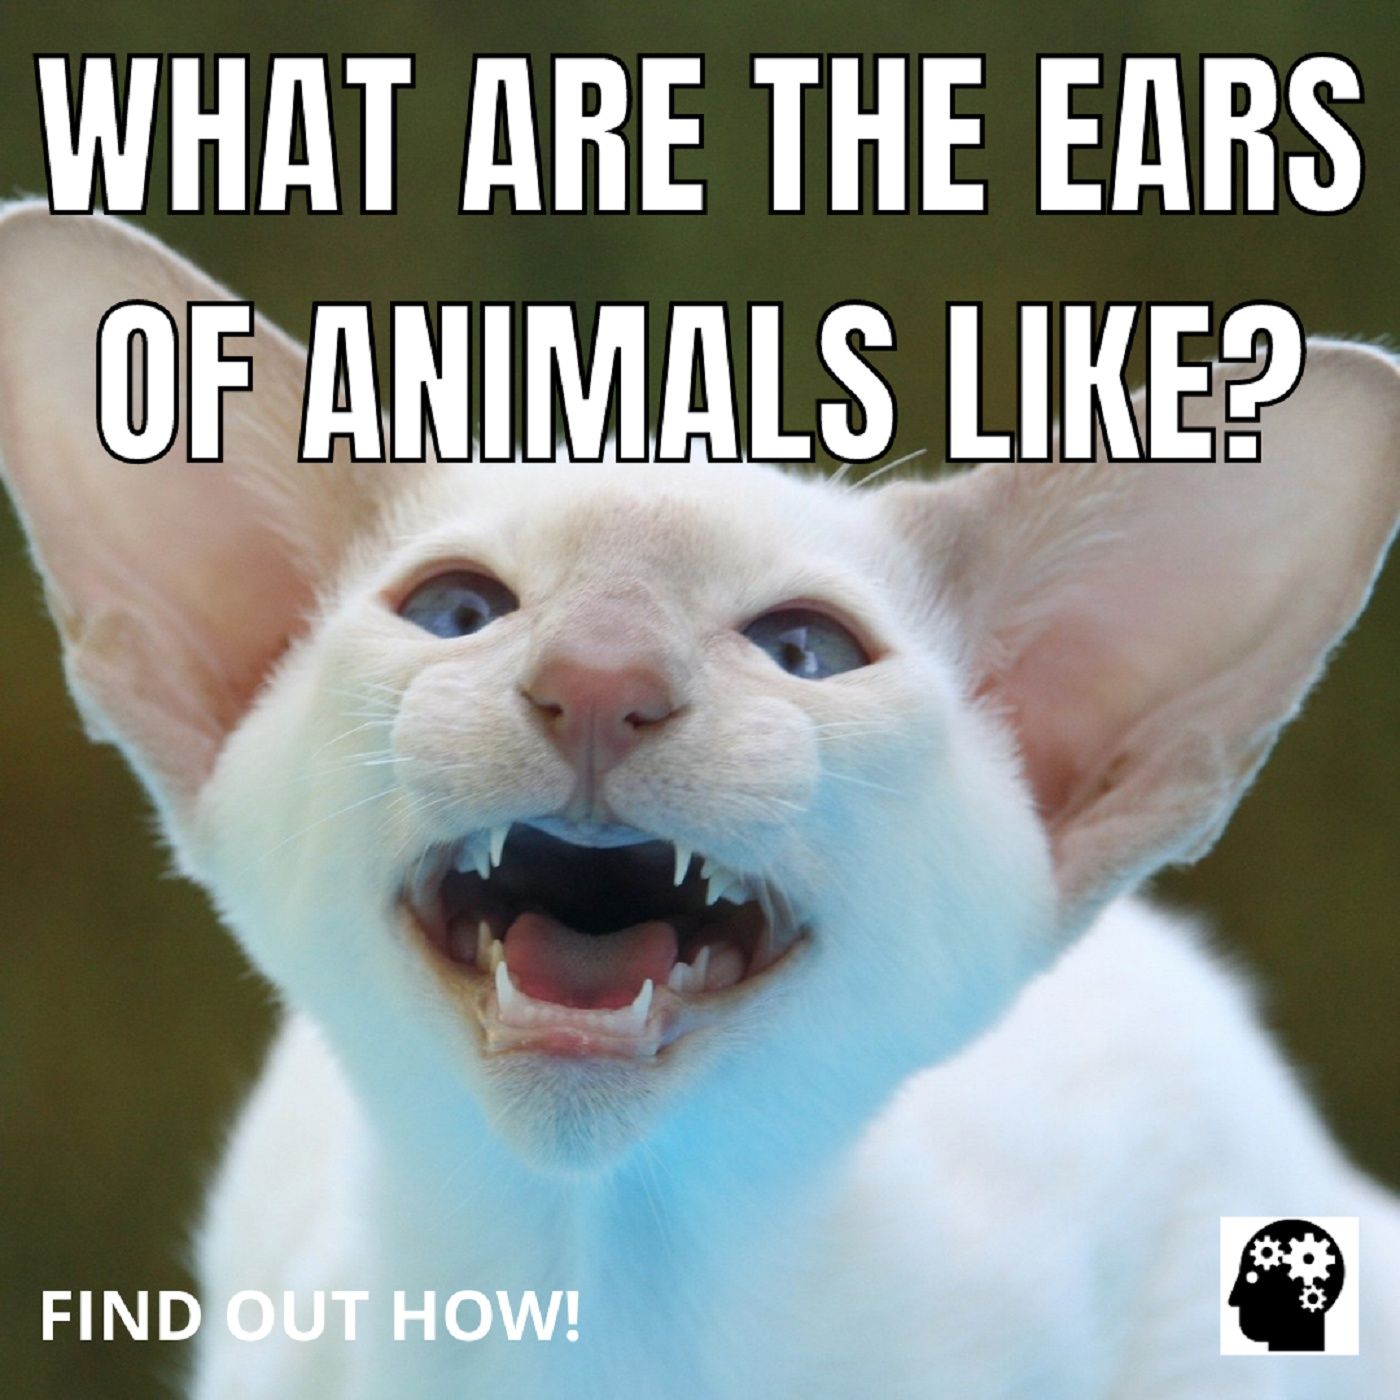 What Are The Ears Of Animals Like?